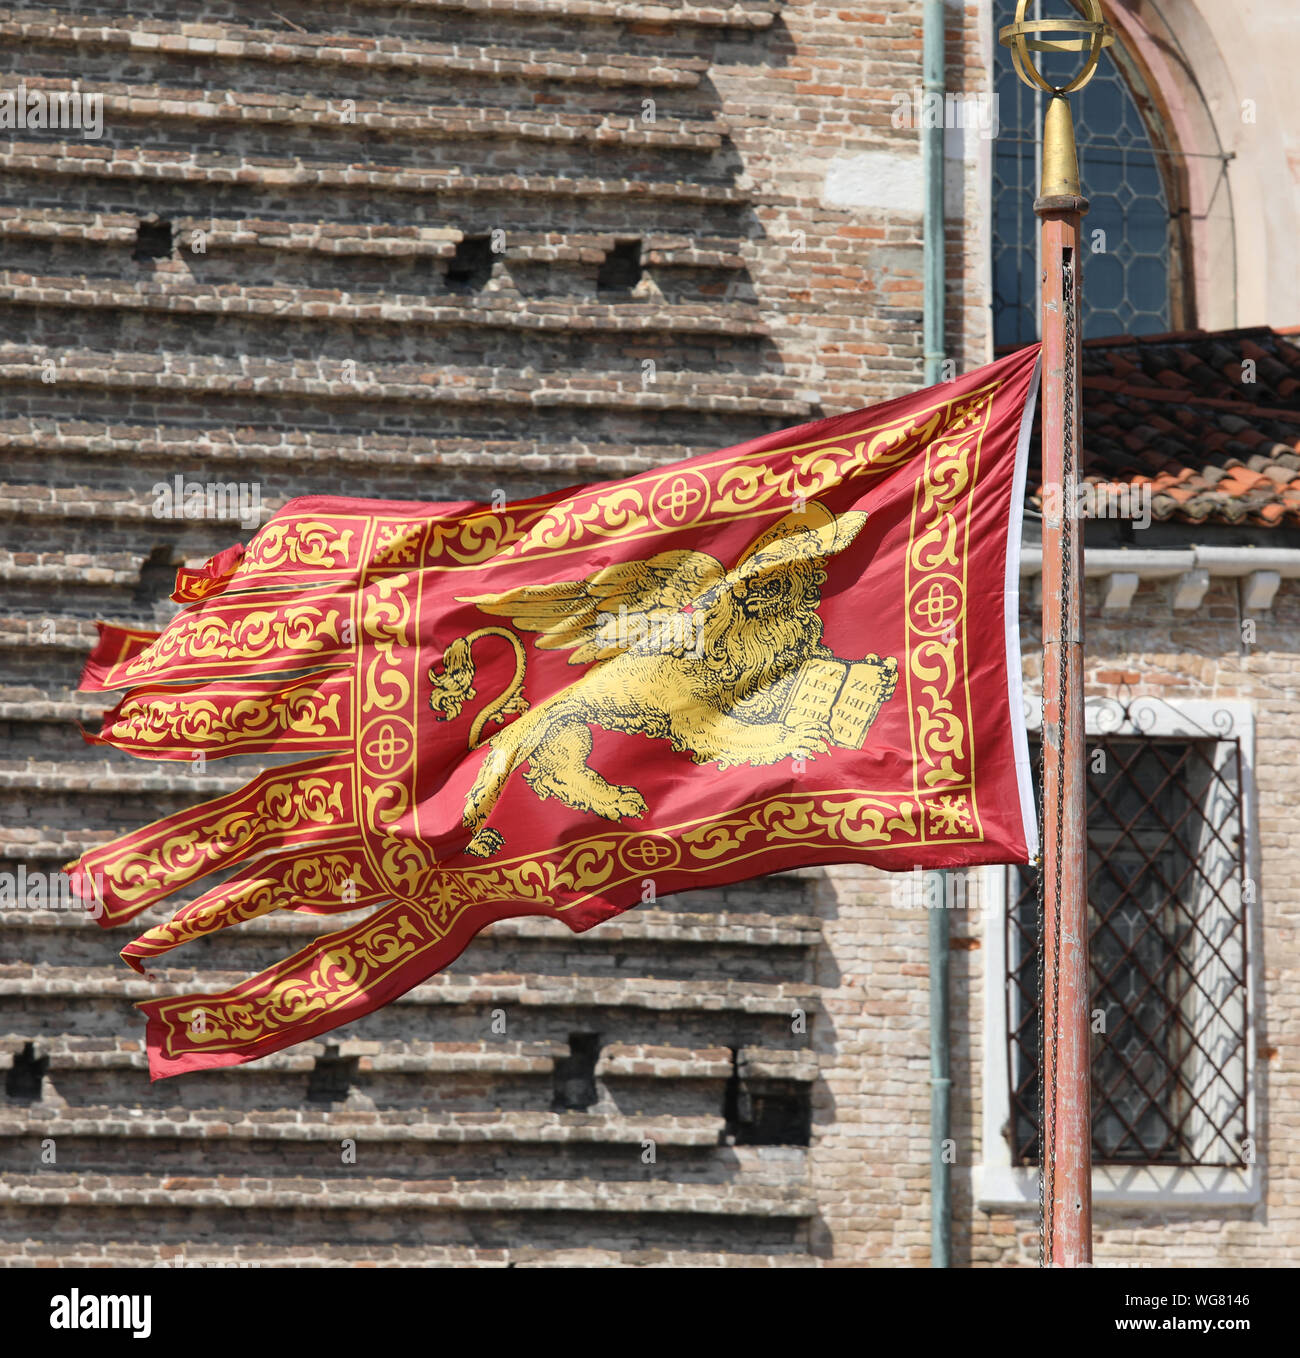 Golden Winged Lion on the Red Flag is the symbol of Serenissima Repubblica in Venice in Italy Stock Photo